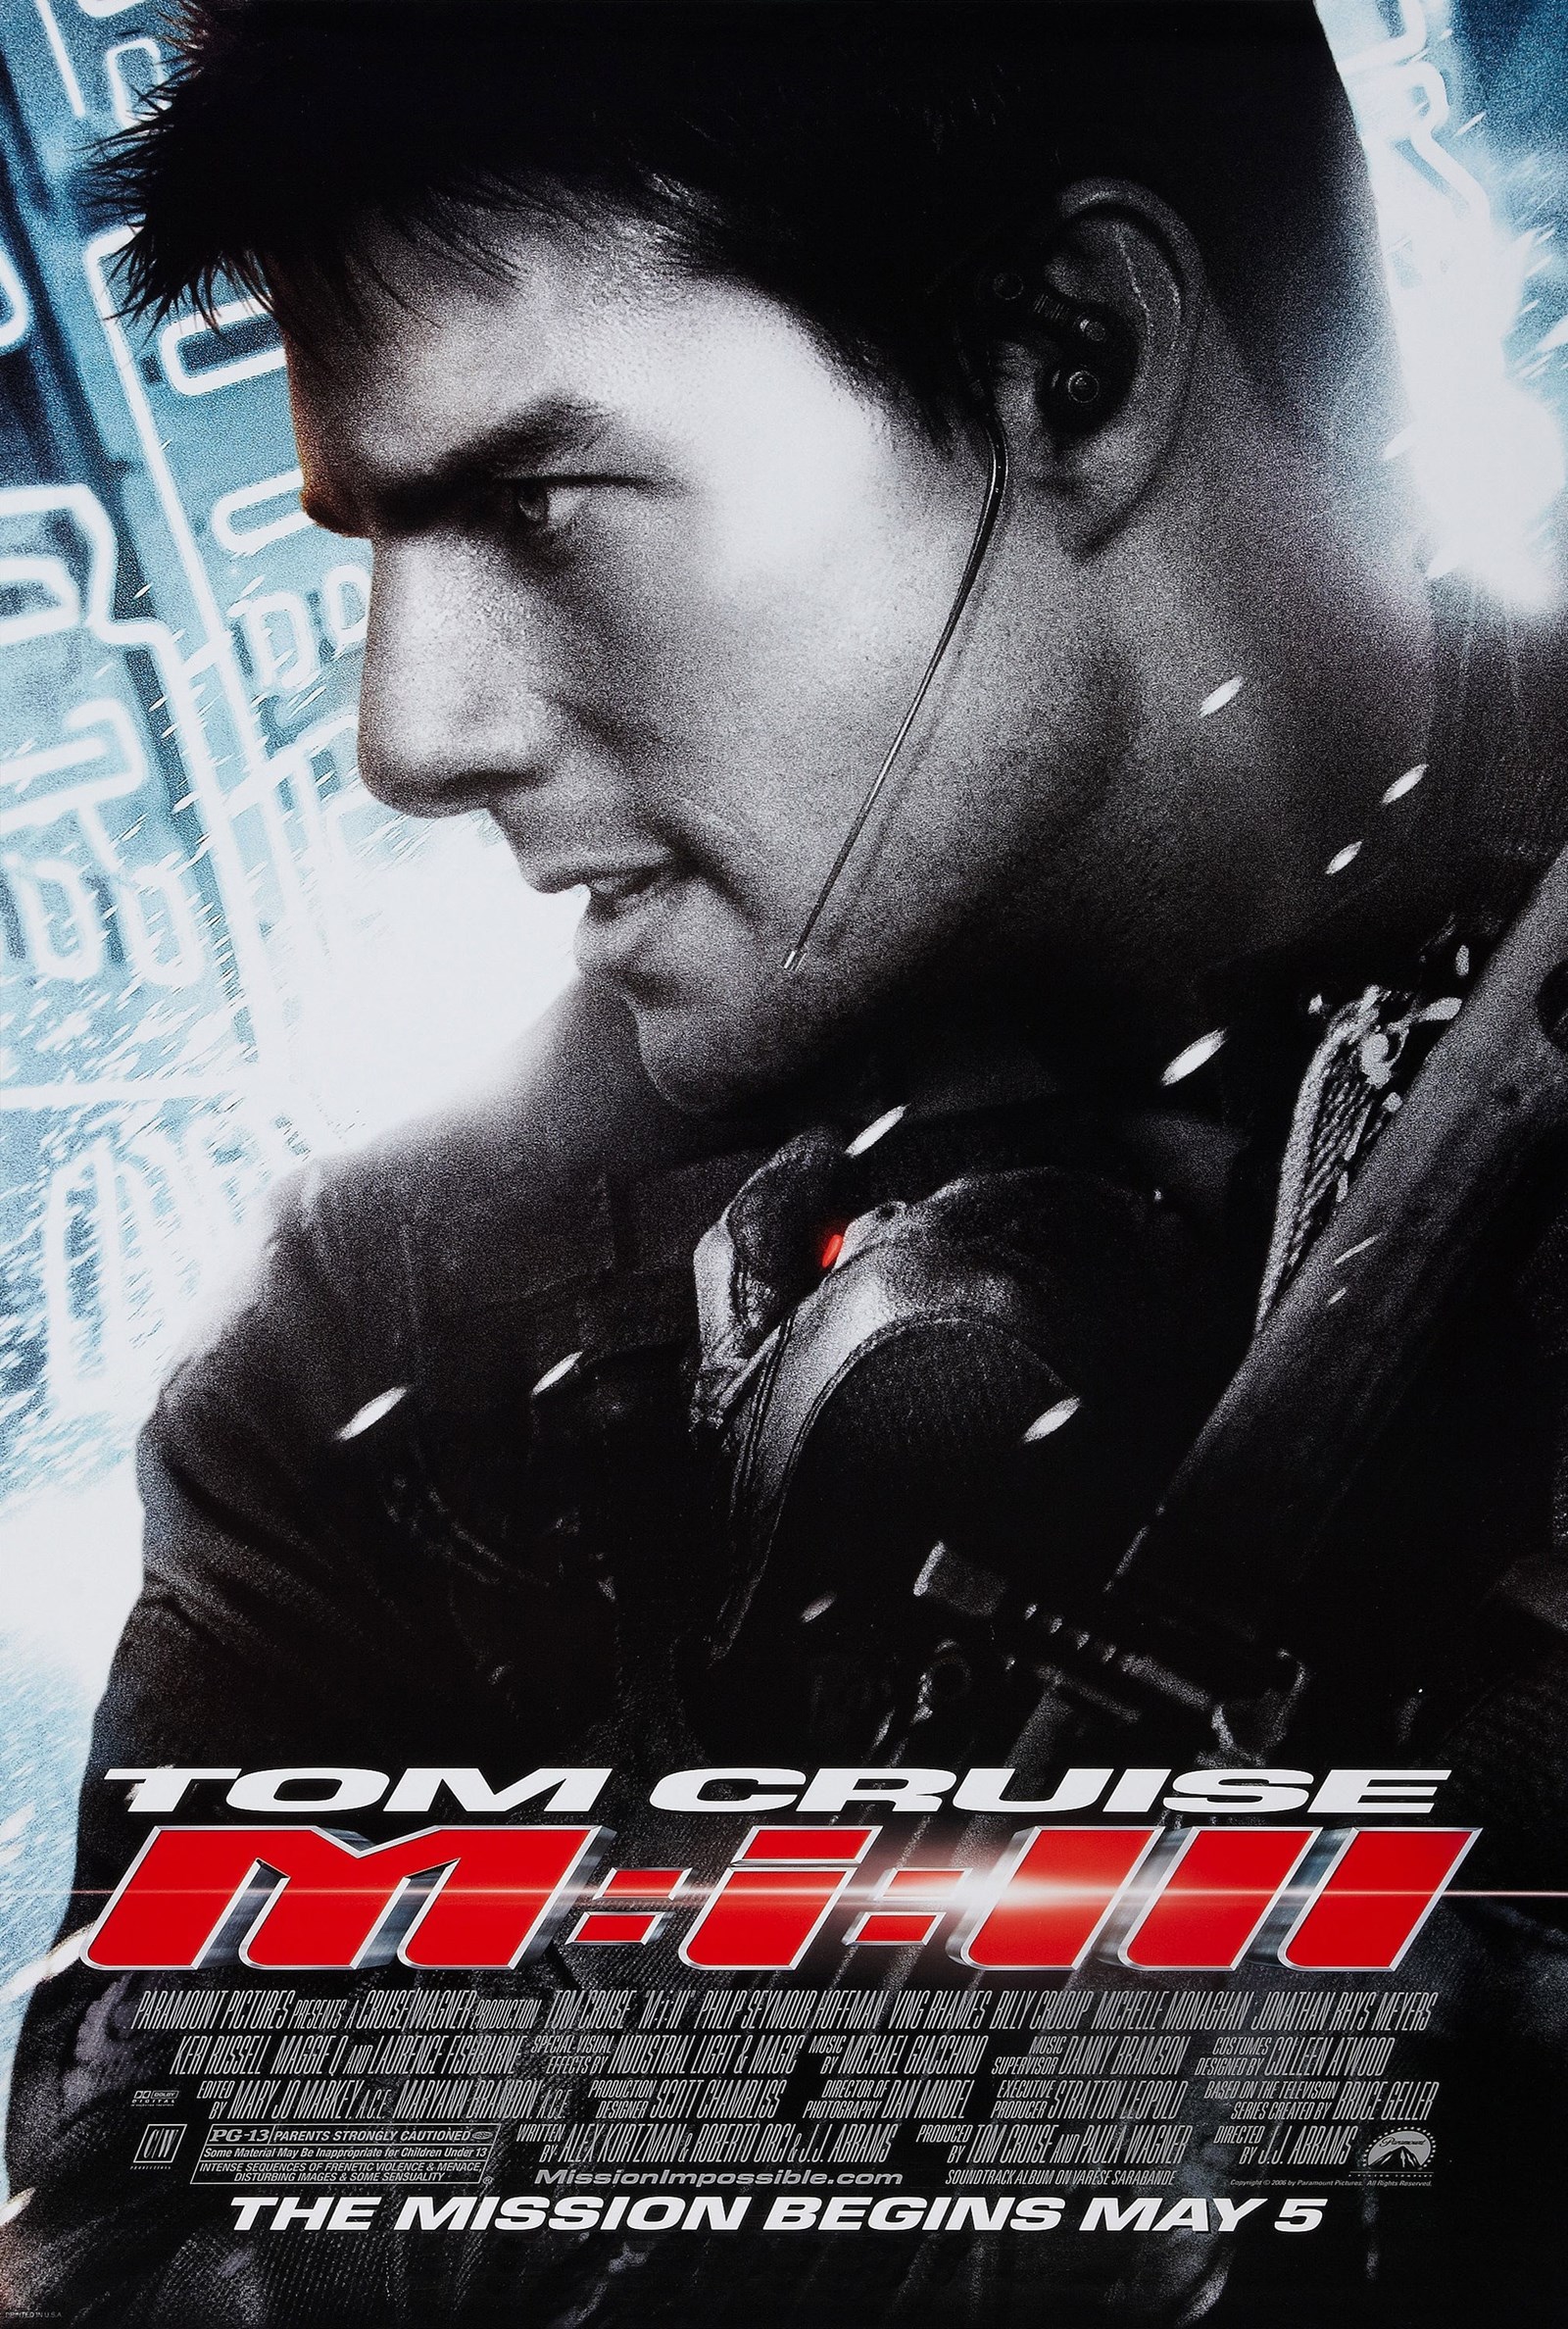 Mission impossible 4 ghost protocol hindi dubbed torrent download